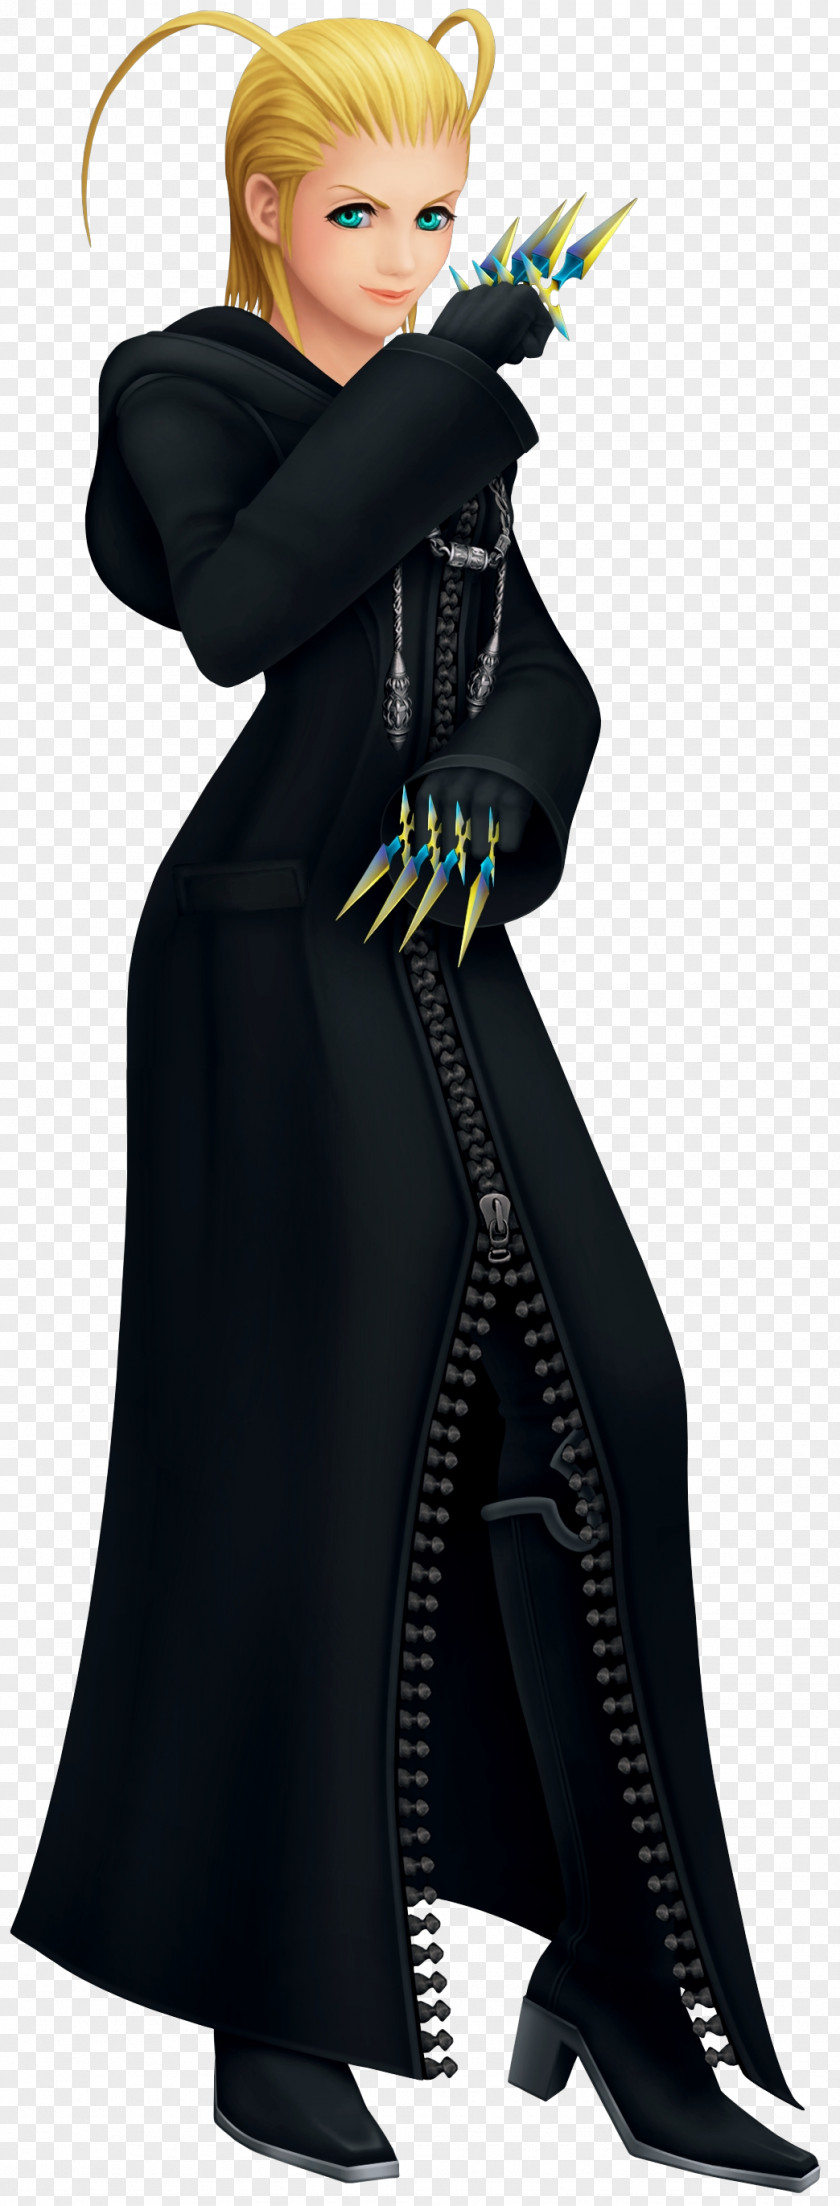 Kingdom Hearts Shanelle Workman Hearts: Chain Of Memories II 358/2 Days Organization XIII PNG